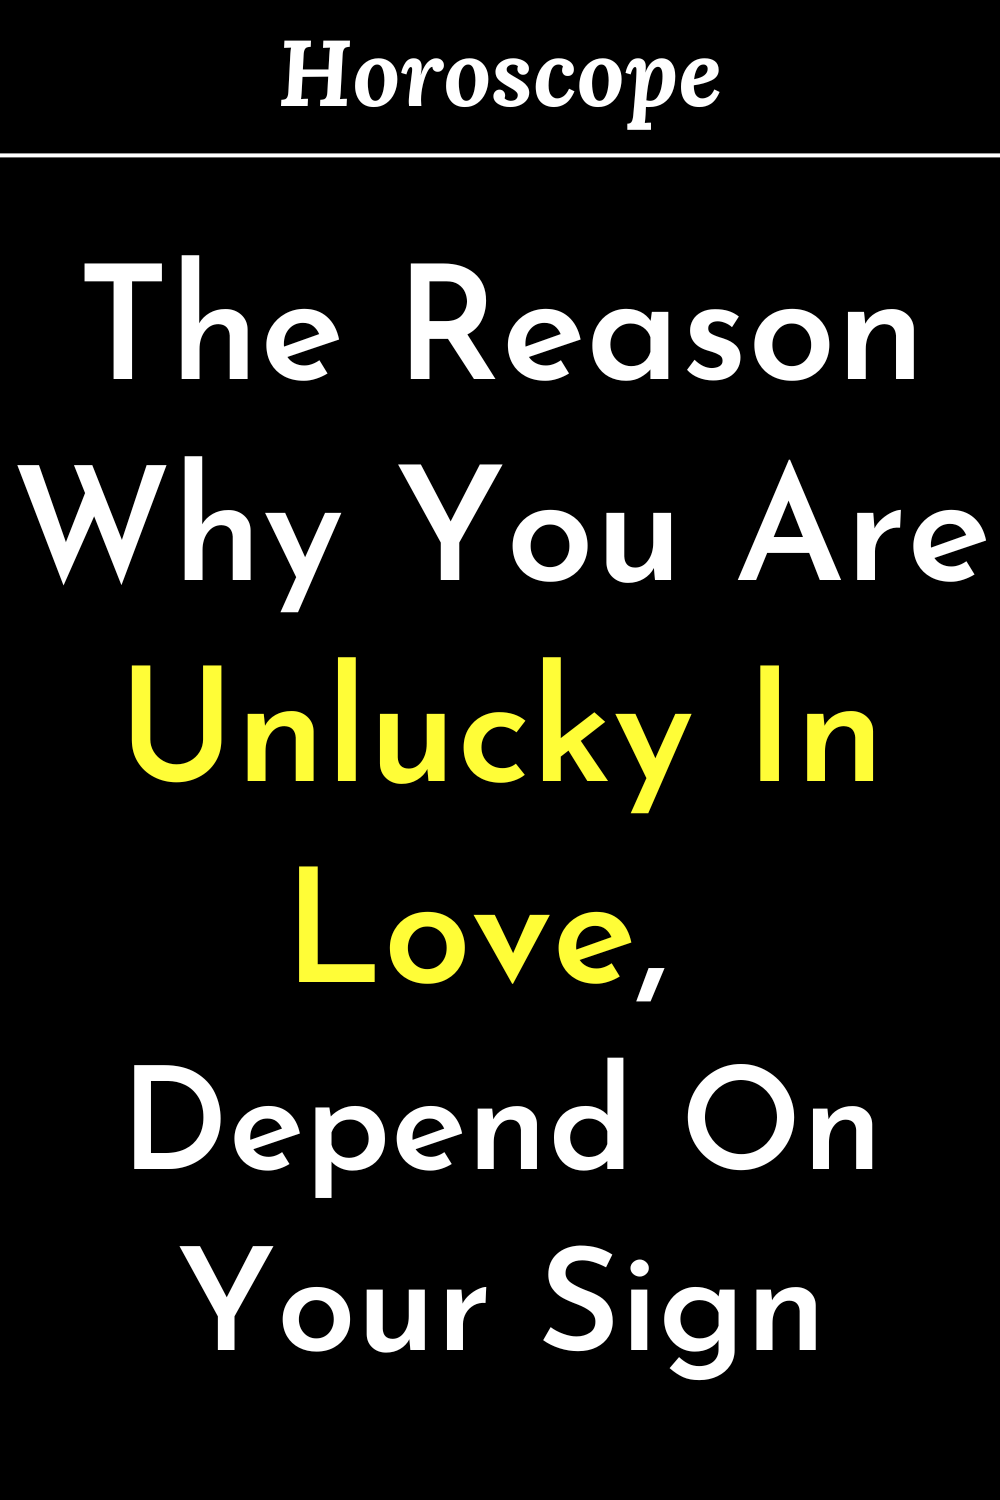 The Reason Why You Are Unlucky In Love, Depend On Your Sign